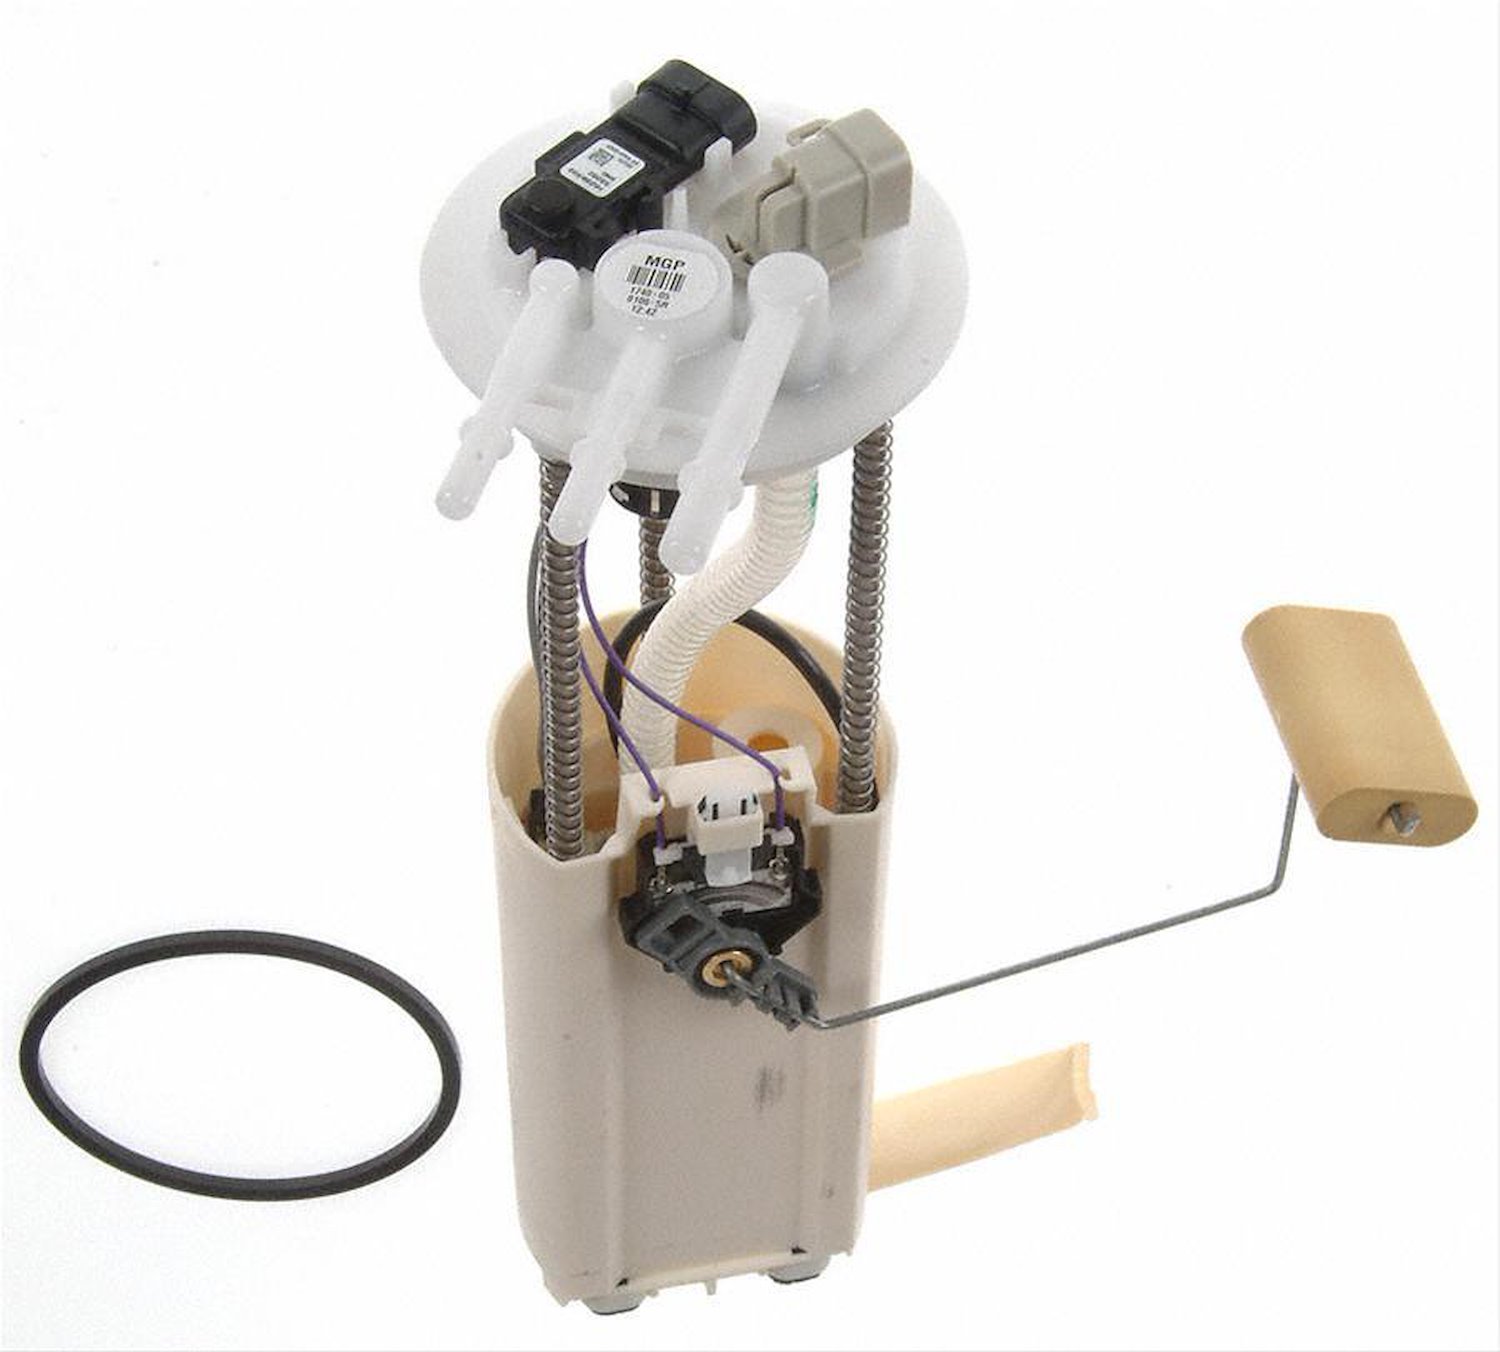 OE GM Replacement Electric Fuel Pump Module Assembly 2000-05 Chevrolet Astro 4.3L V6